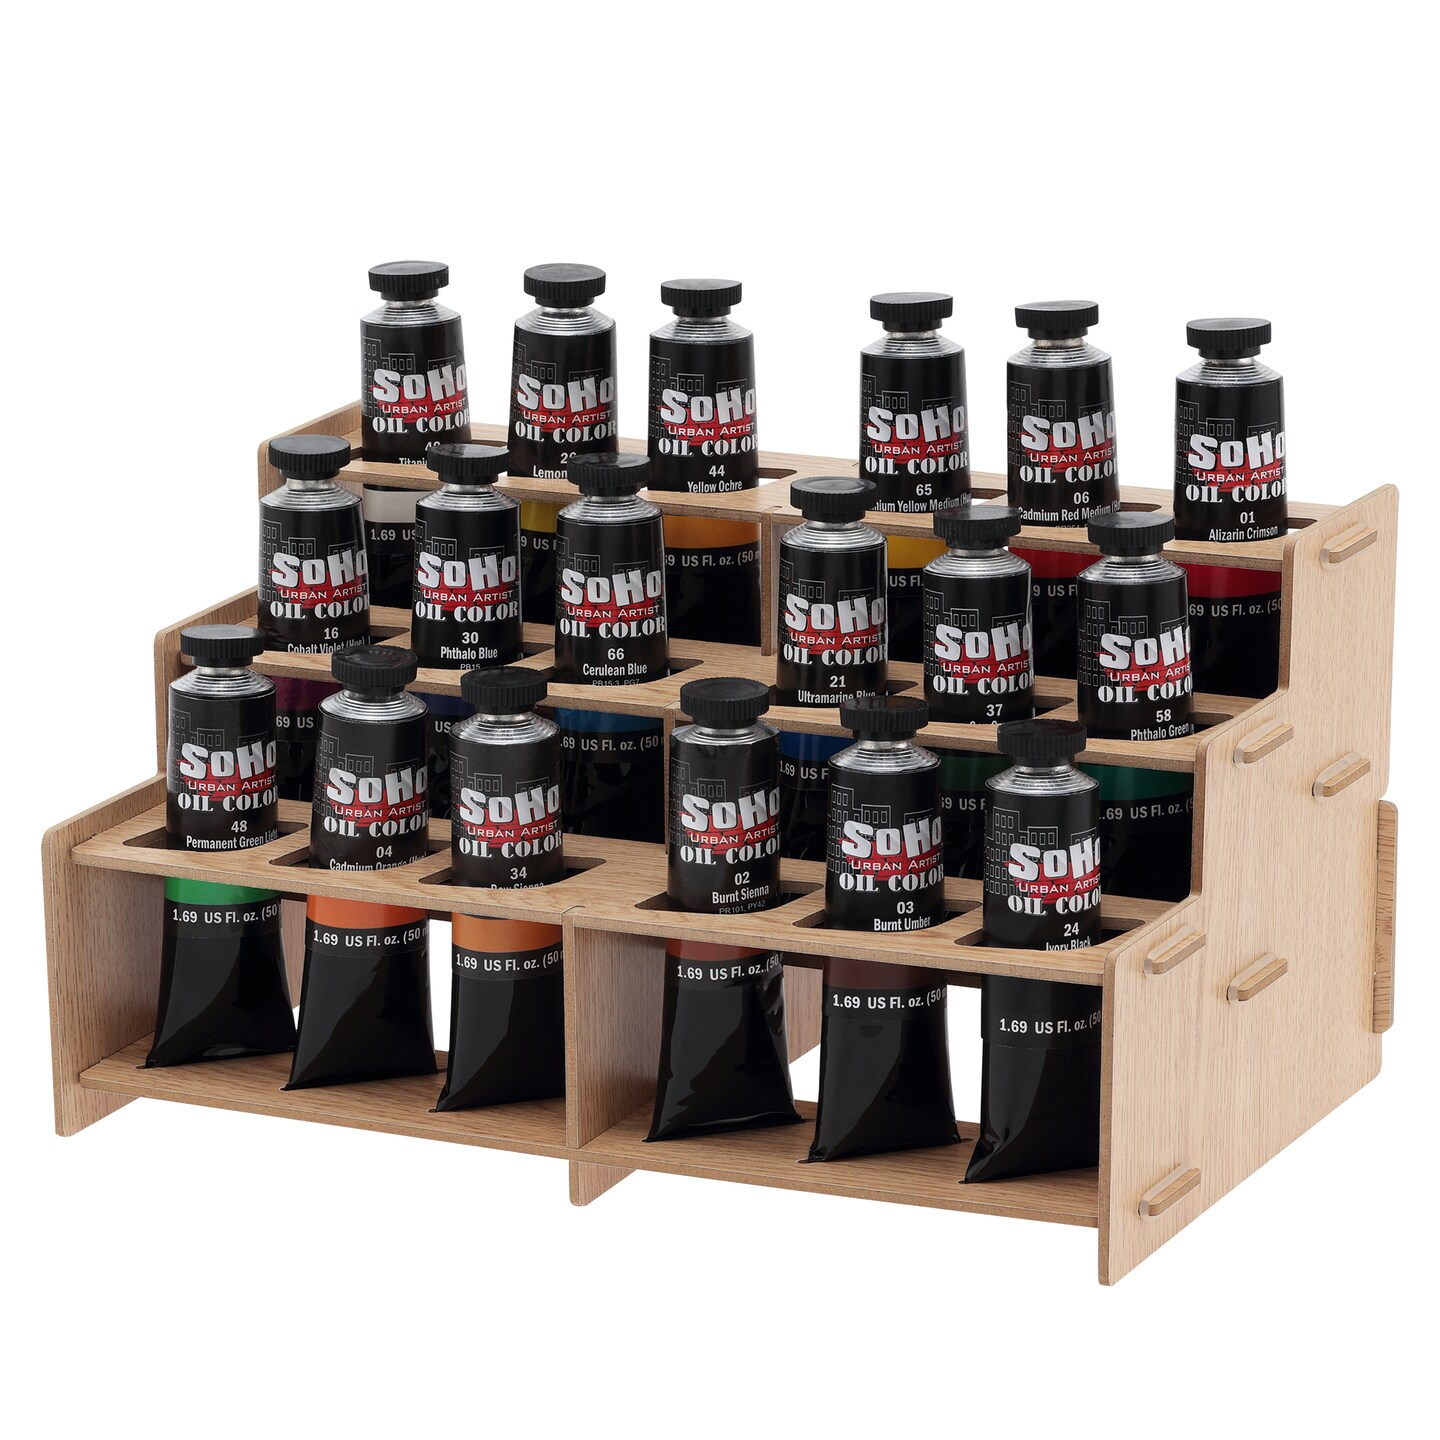 Soho Urban Artist Oil Paints - Professional Grade Landscape Oil Paint Set of 18, 50ml paint tubes with Mezzo Straight Rack No 2, Triple Milled Colors with Maximum Luminosity for Professionals